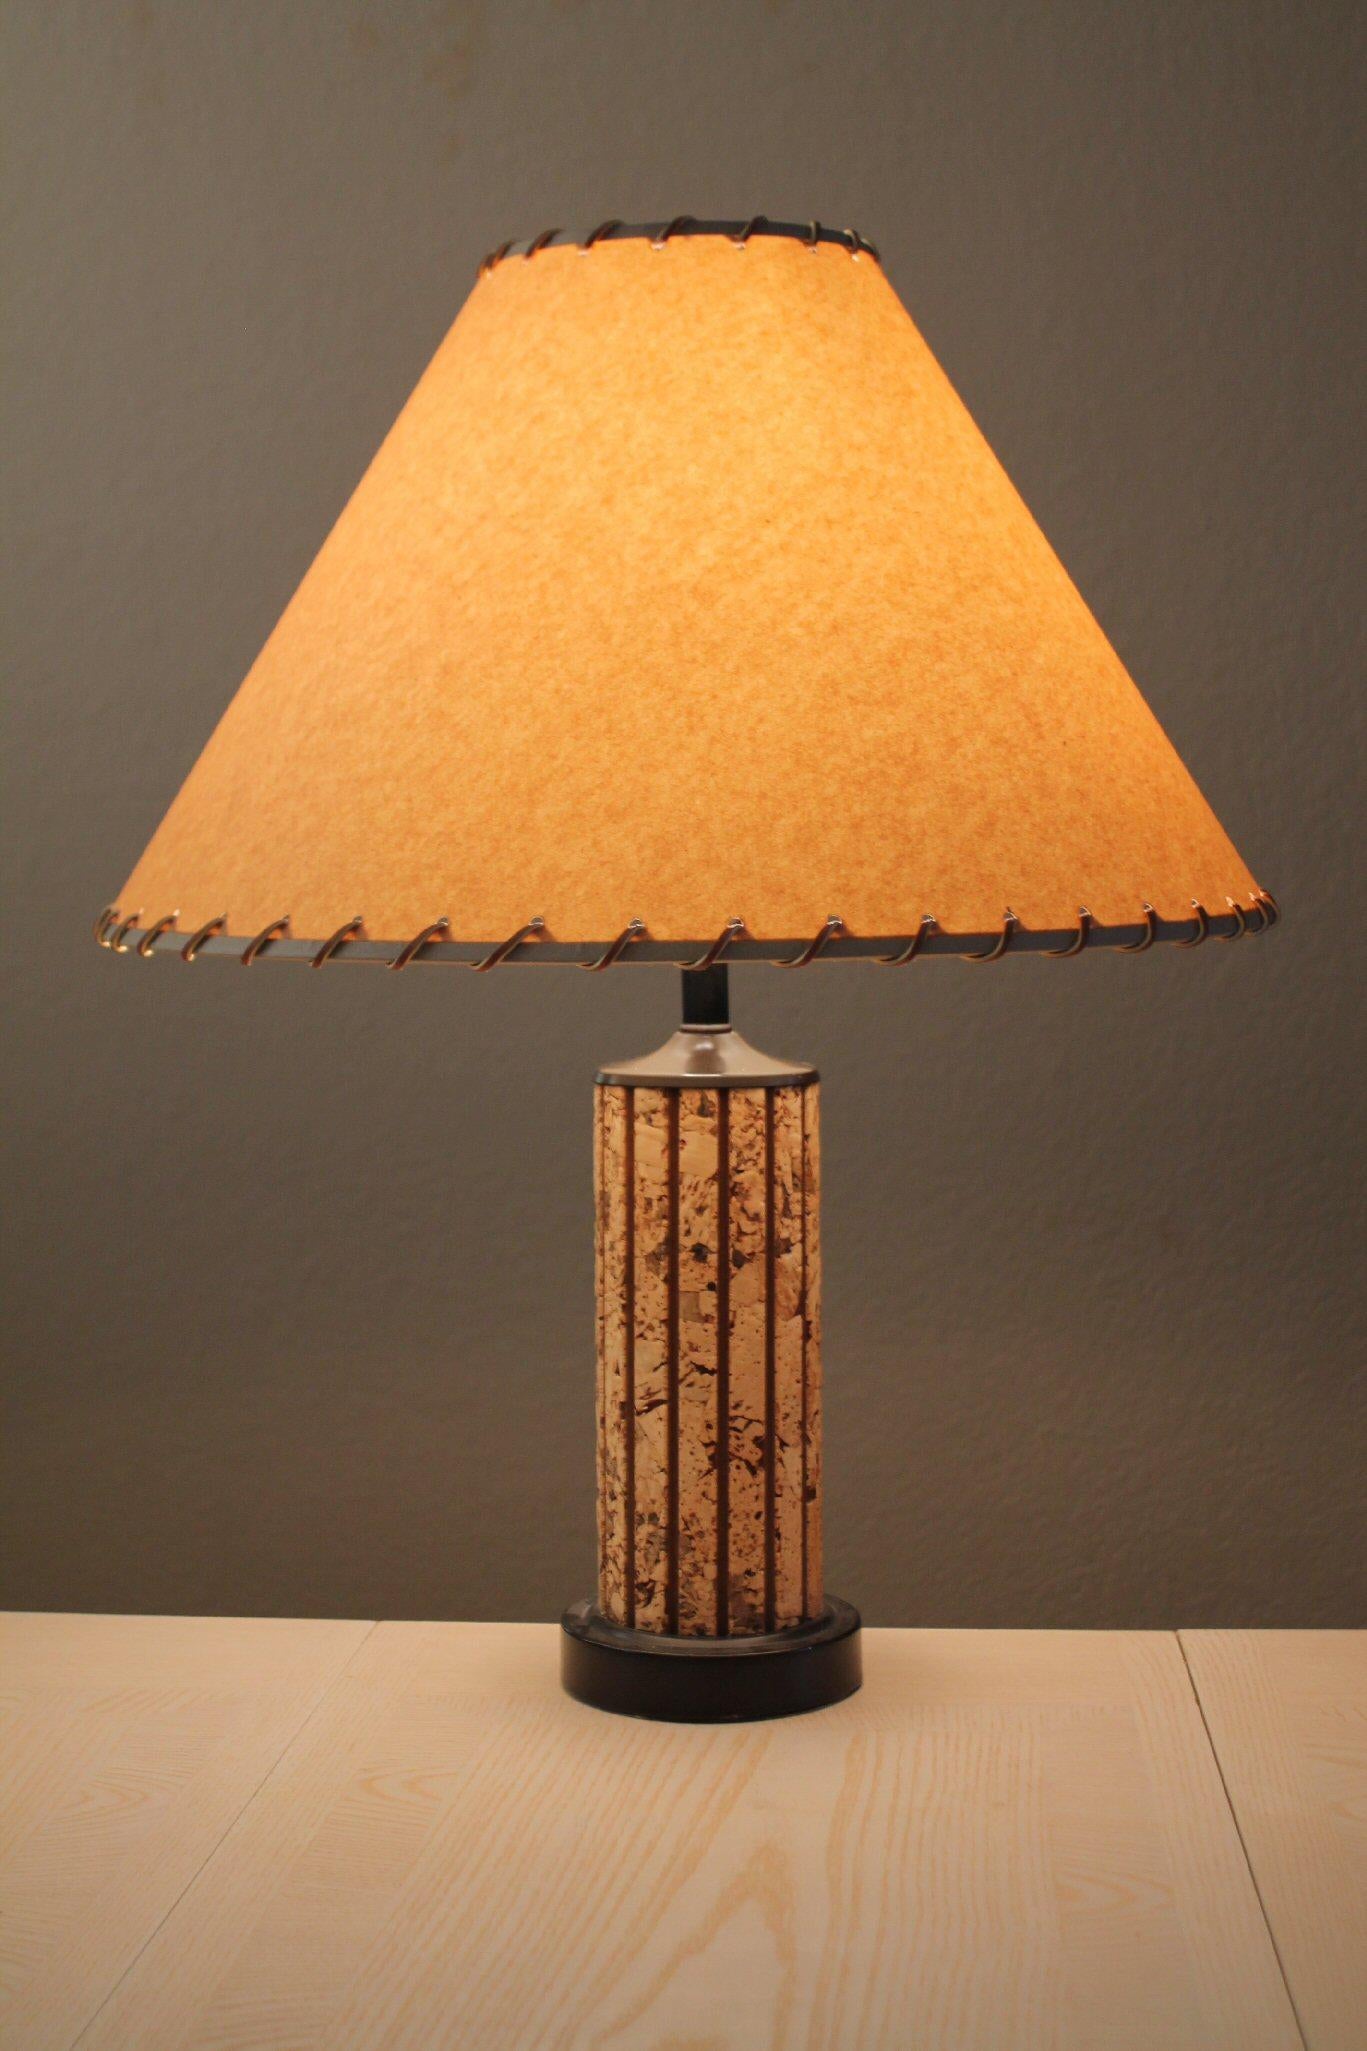 Gorgeous Cork Mid Century Modern Table Lamp! Laced Shade 1960s Decor Lighting In Good Condition For Sale In Peoria, AZ